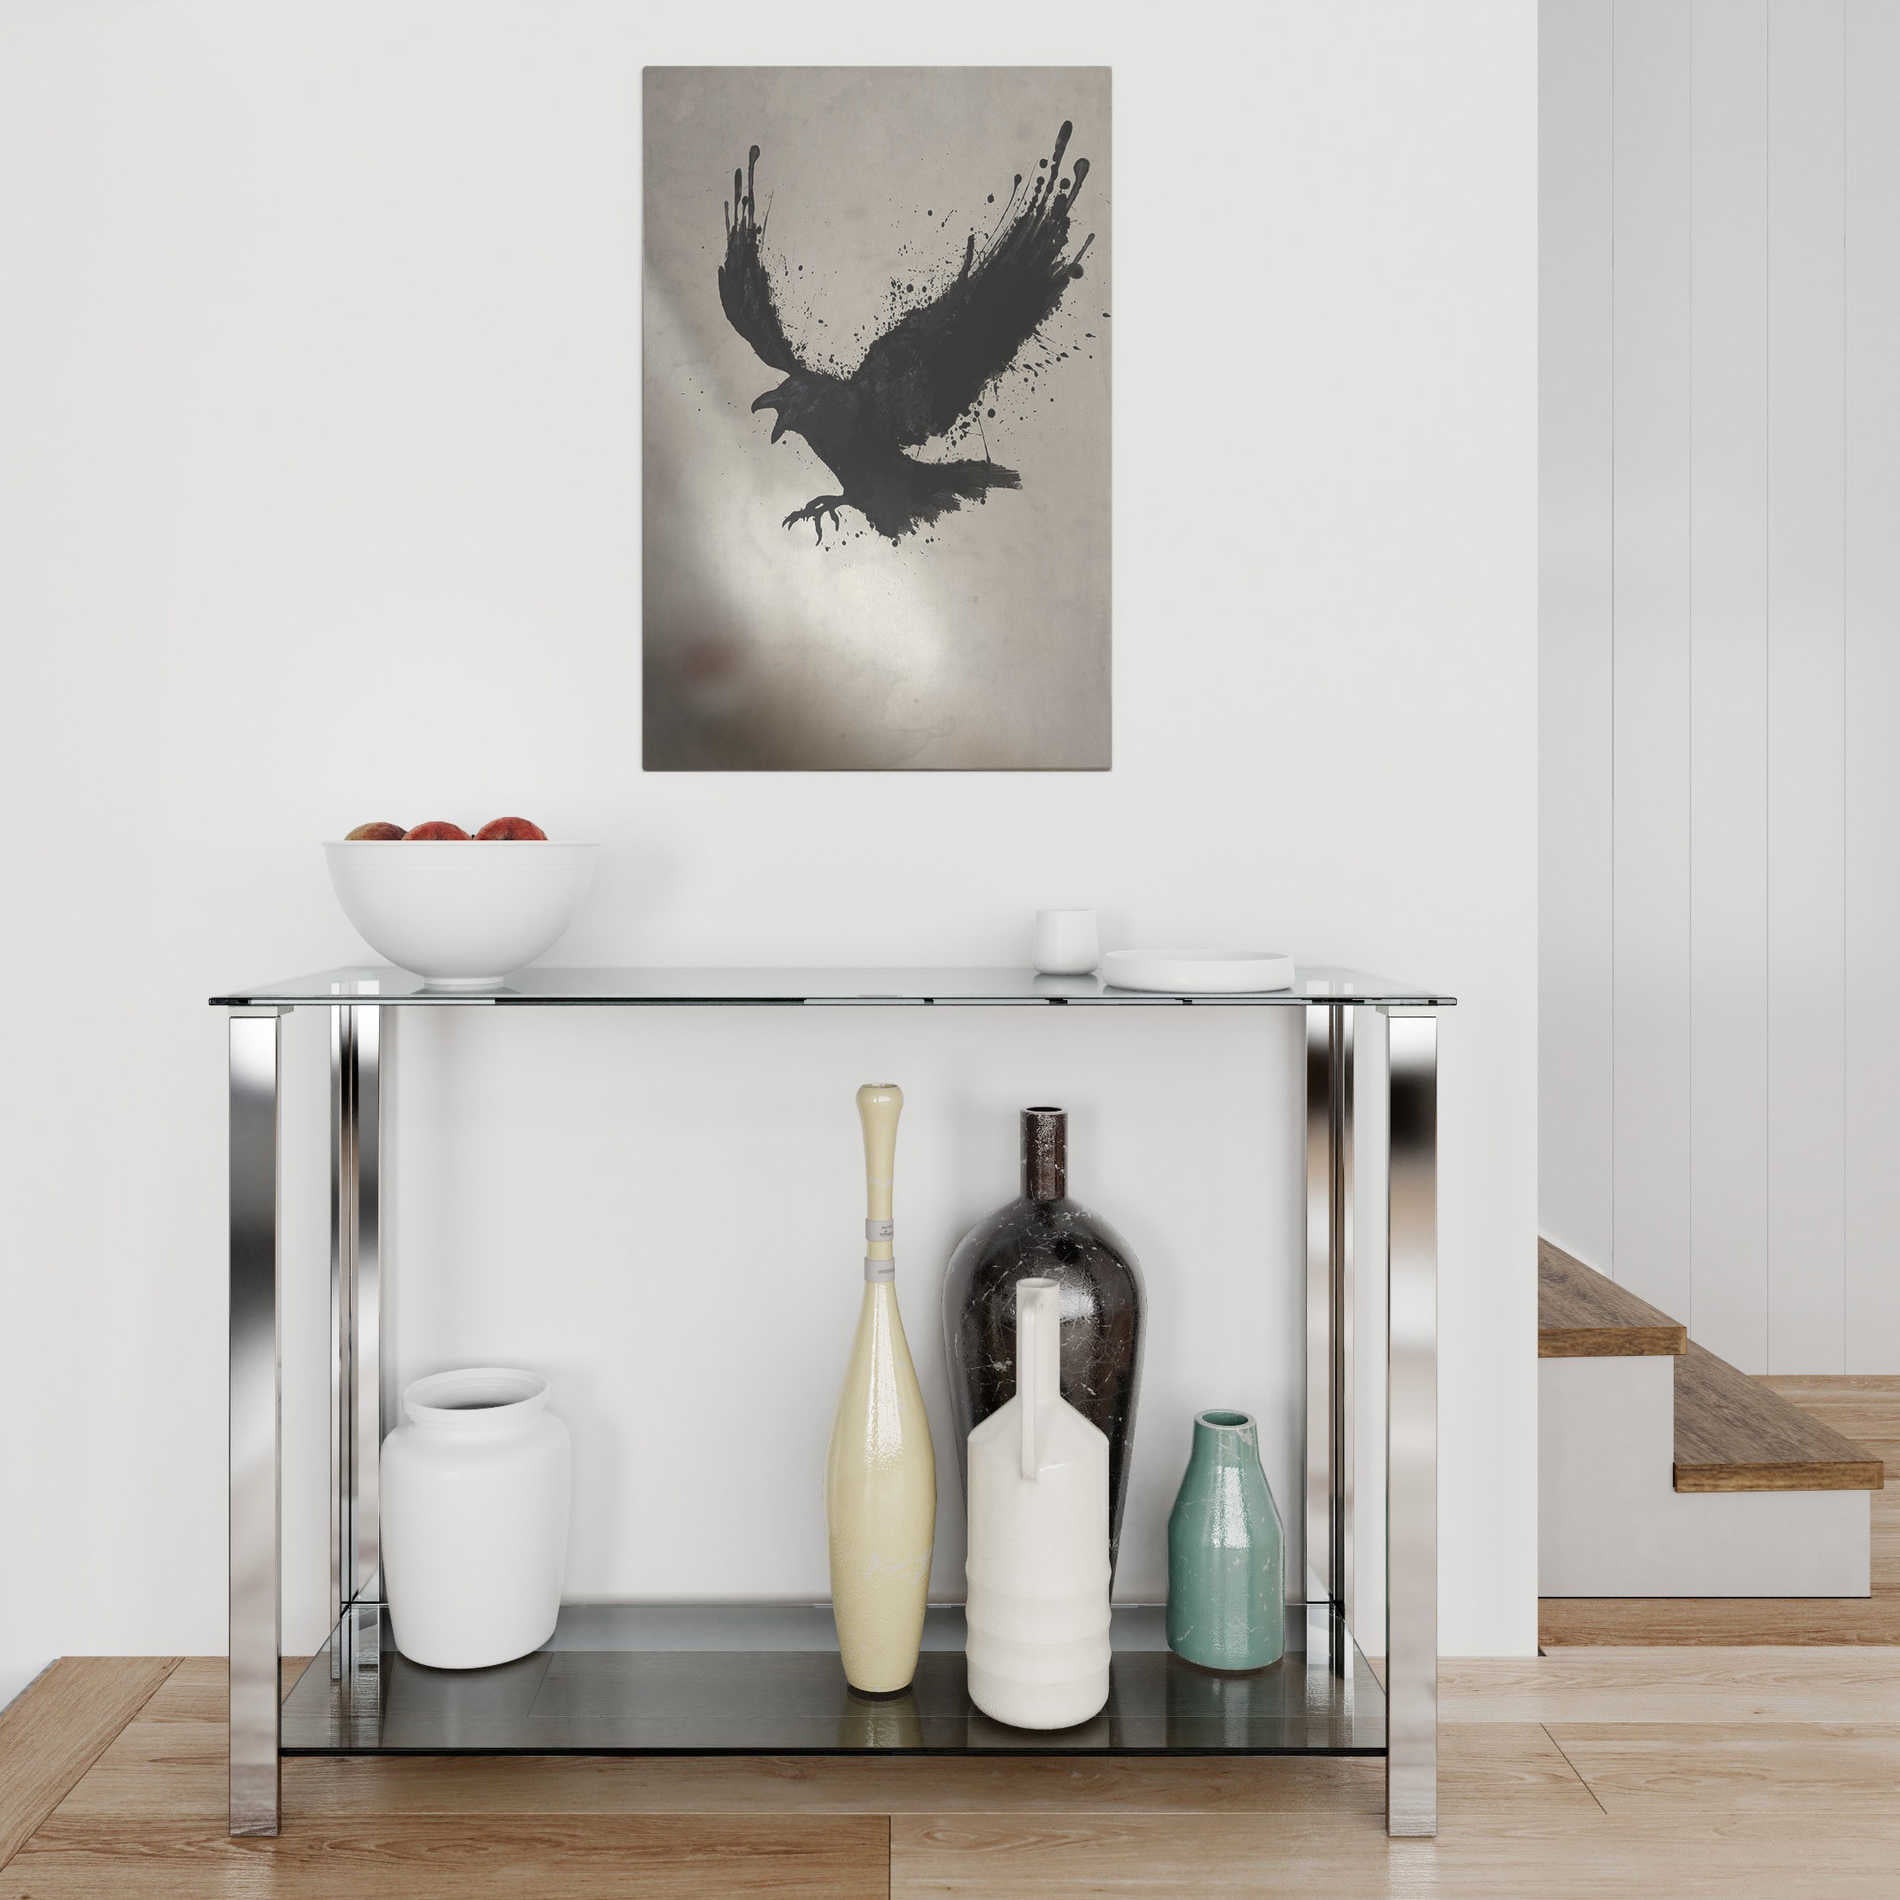 Epic Art "Raven" by Nicklas Gustafsson, on Brushed Aluminum